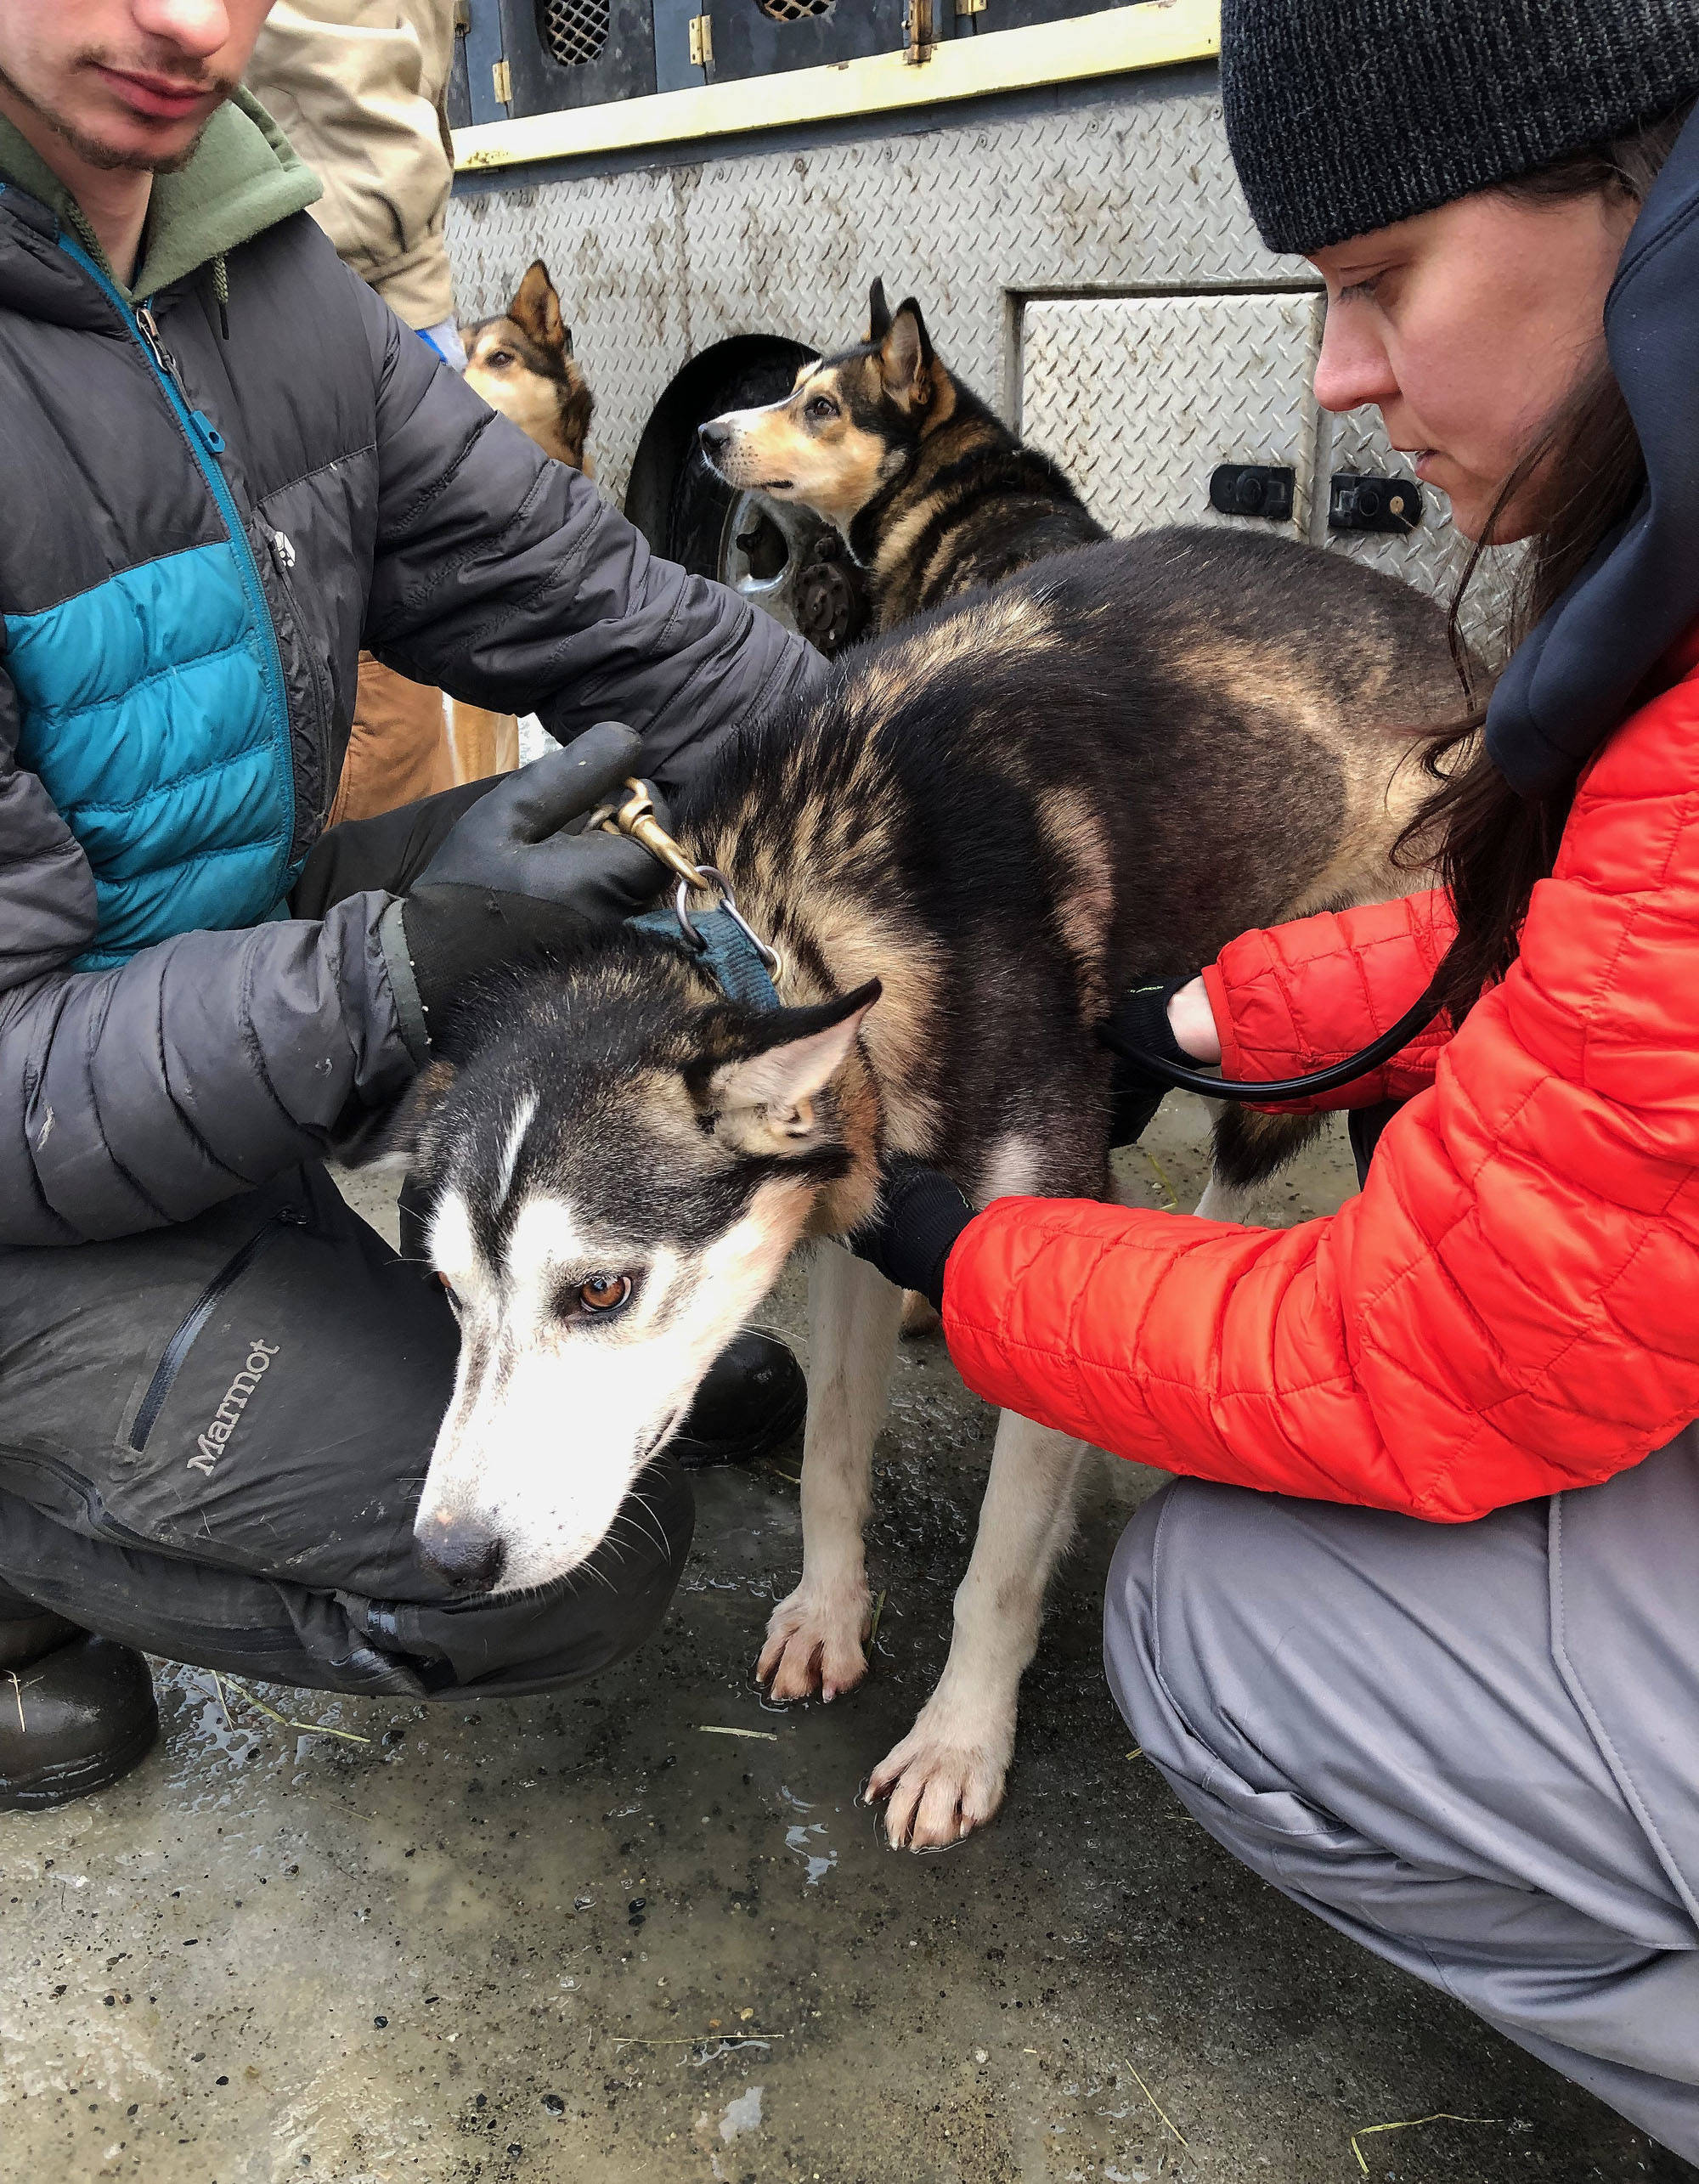 Grayson Bruton (left) and Stephanie Meilleur check the health of one of Mitch Seavey’s dogs Friday afternoon at the Soldotna Regional Sports Complex, in advance of the Tustumena 200 sled dog race. (Photo by Joey Klecka/Peninsula Clarion)